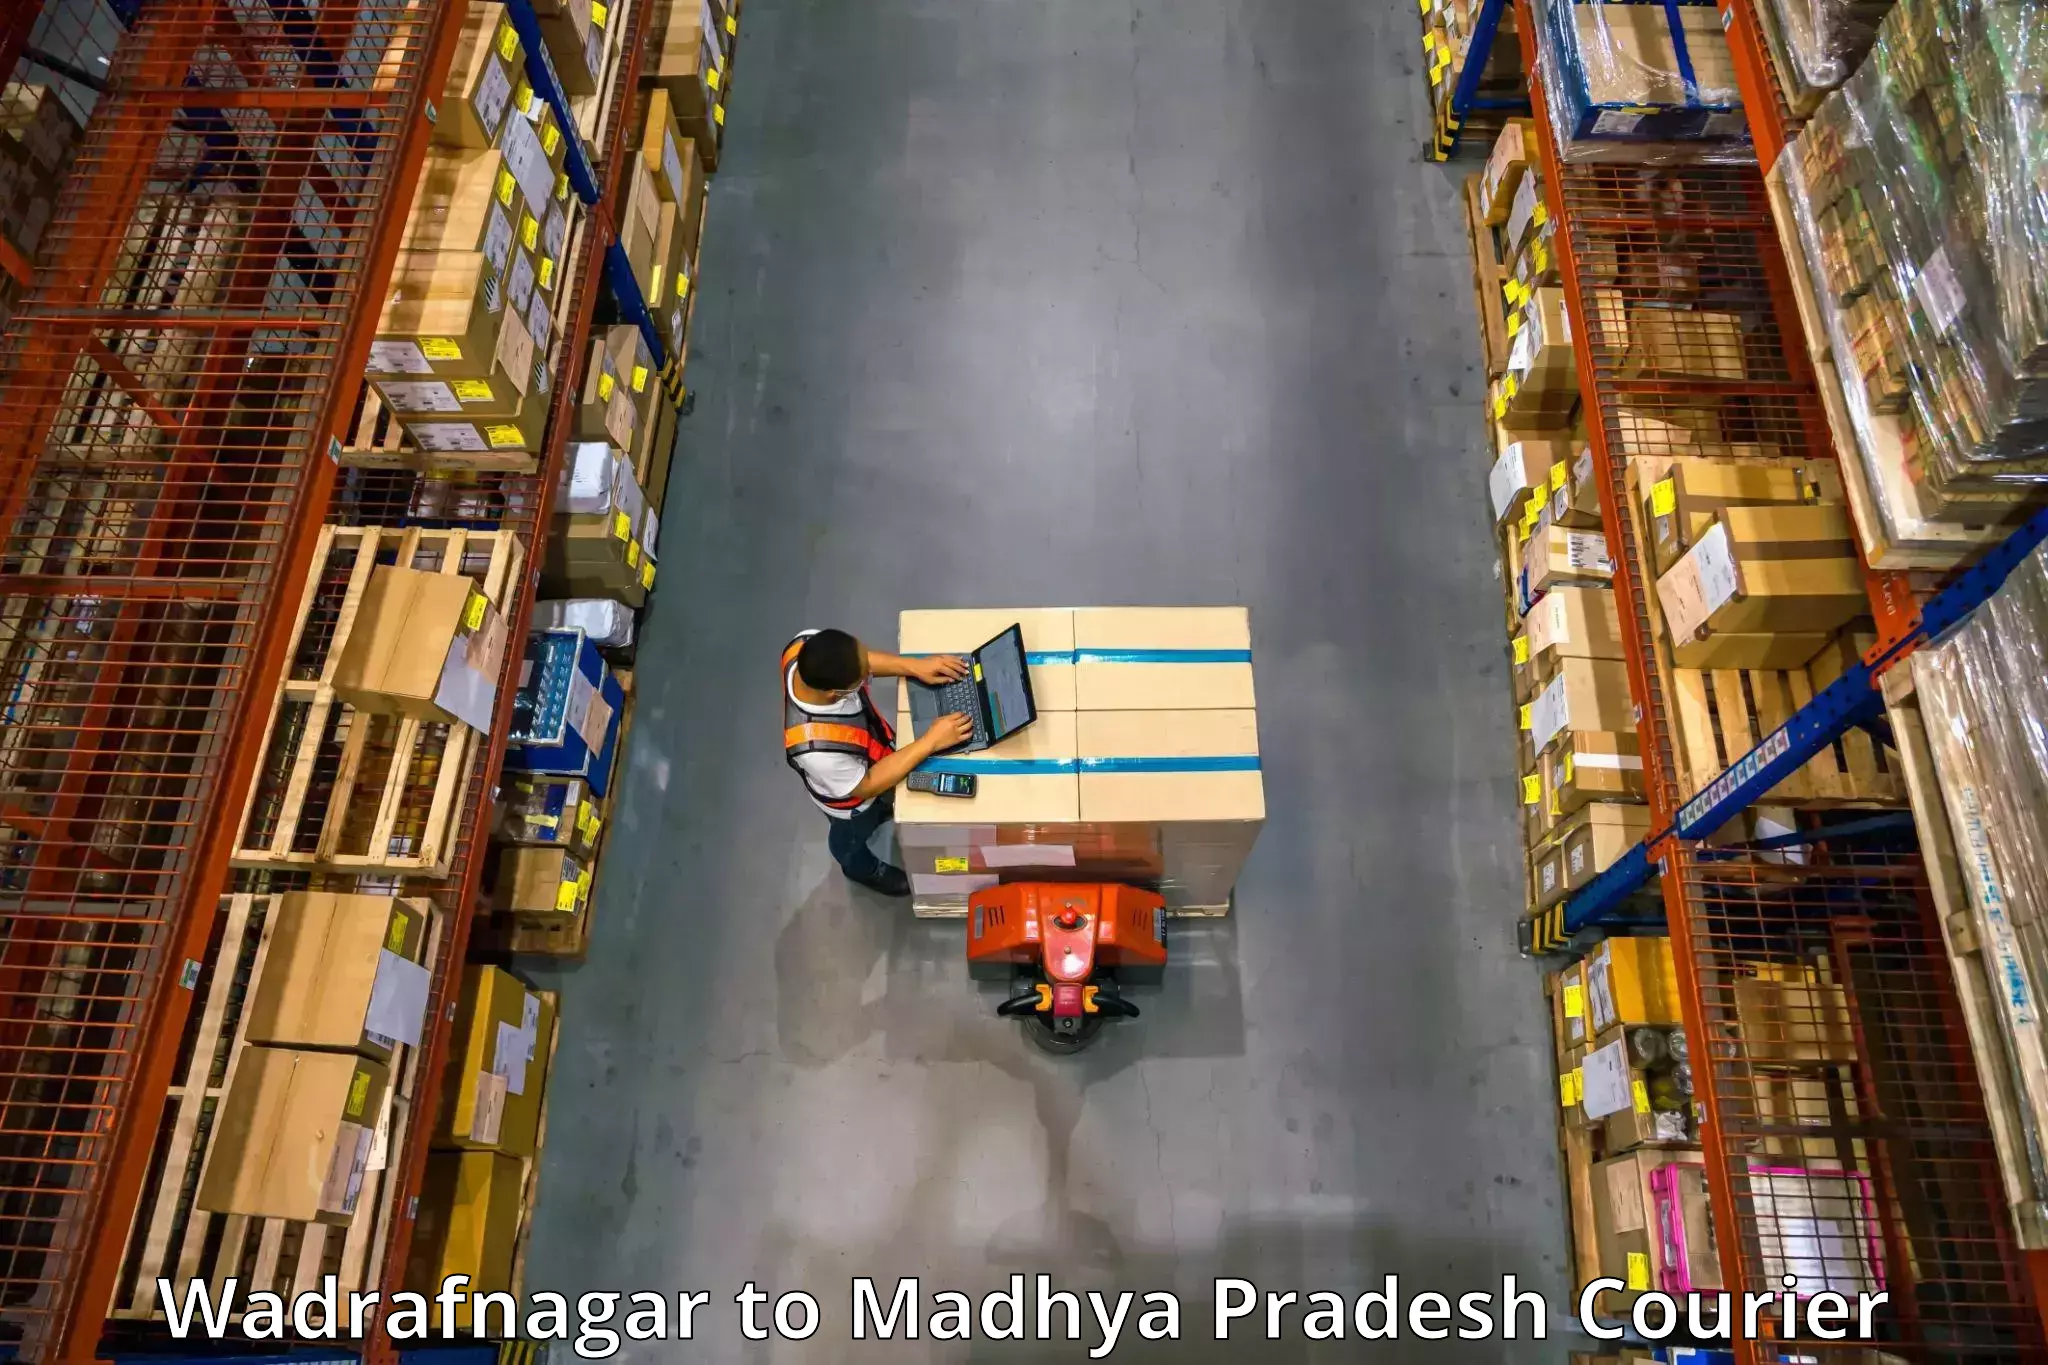 Moving and packing experts Wadrafnagar to Jaora